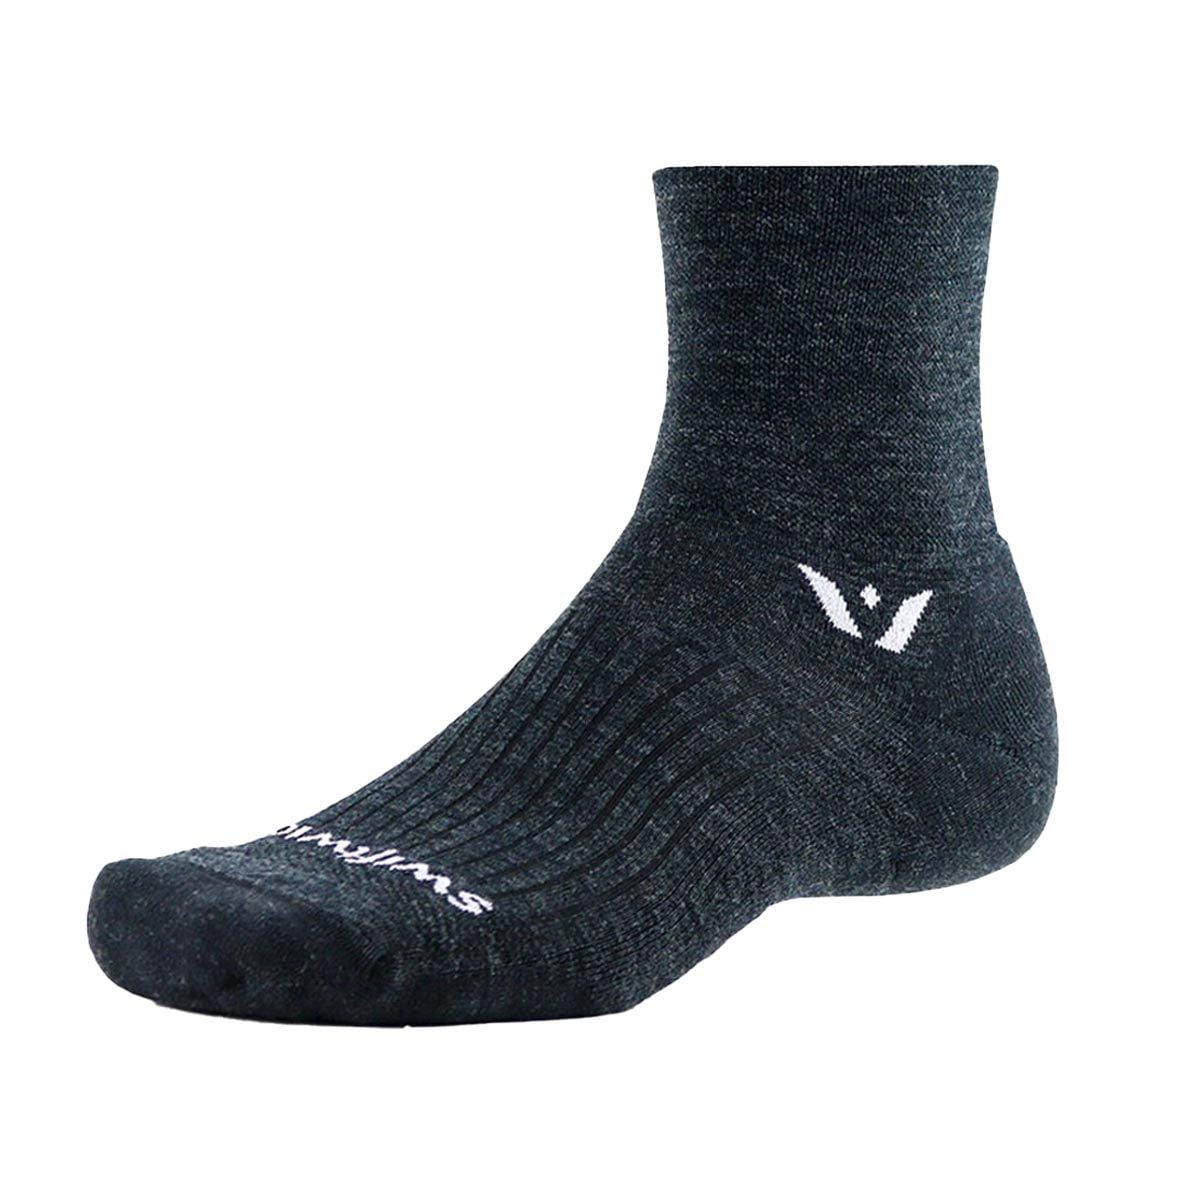 Swiftwick PURSUIT Four Coal / Small Apparel - Clothing - Socks